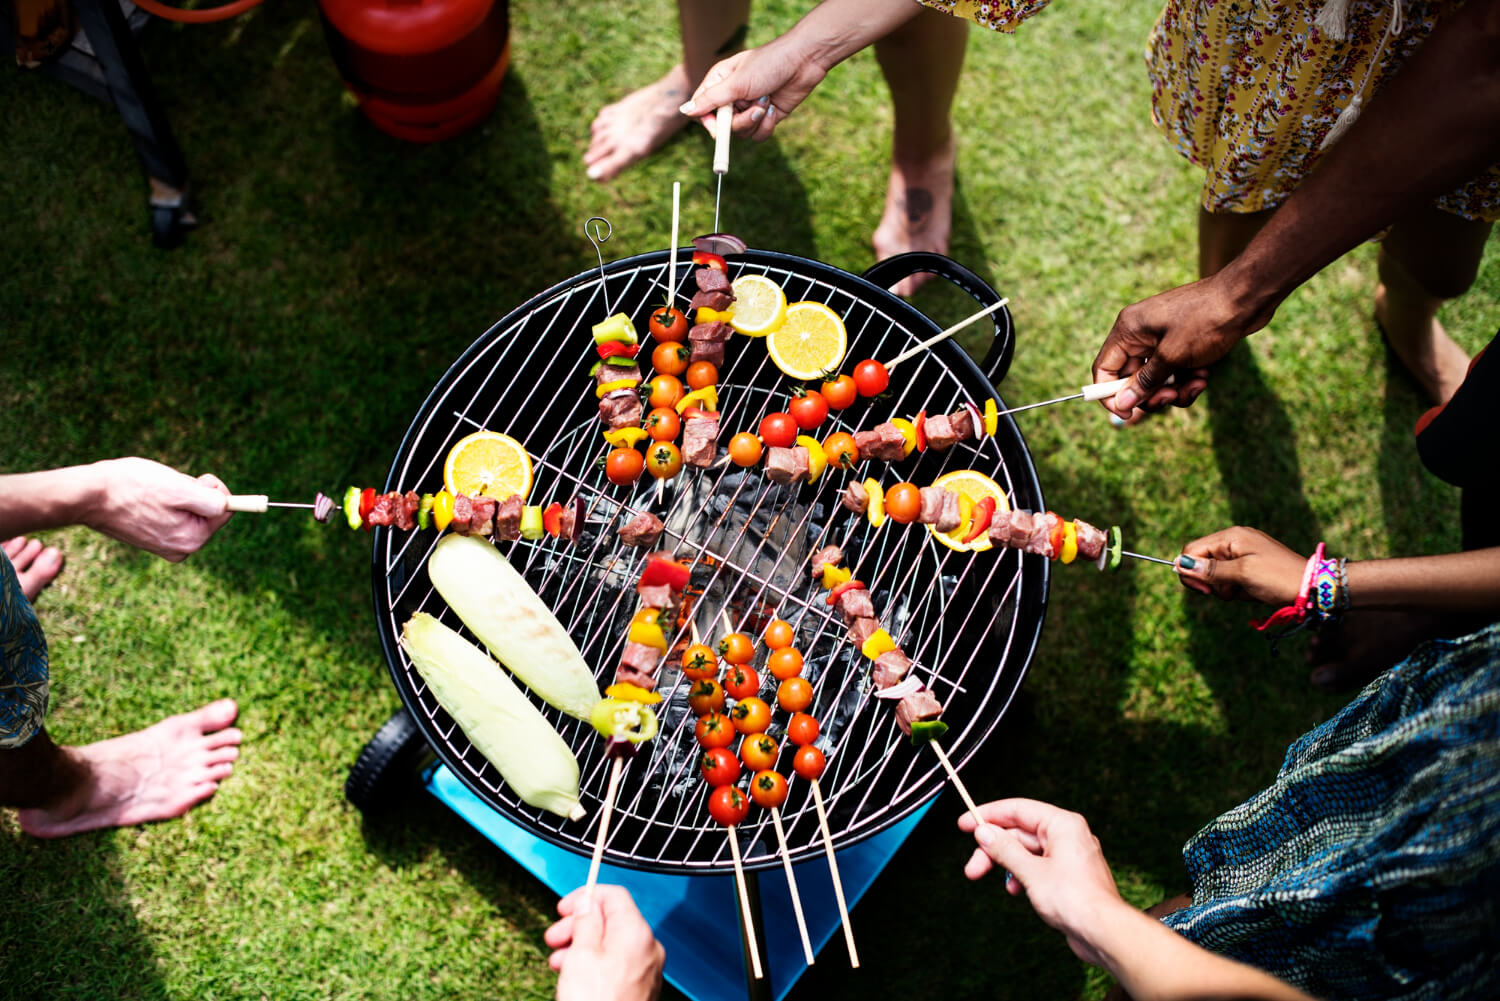 activities for hot summer days - bbq